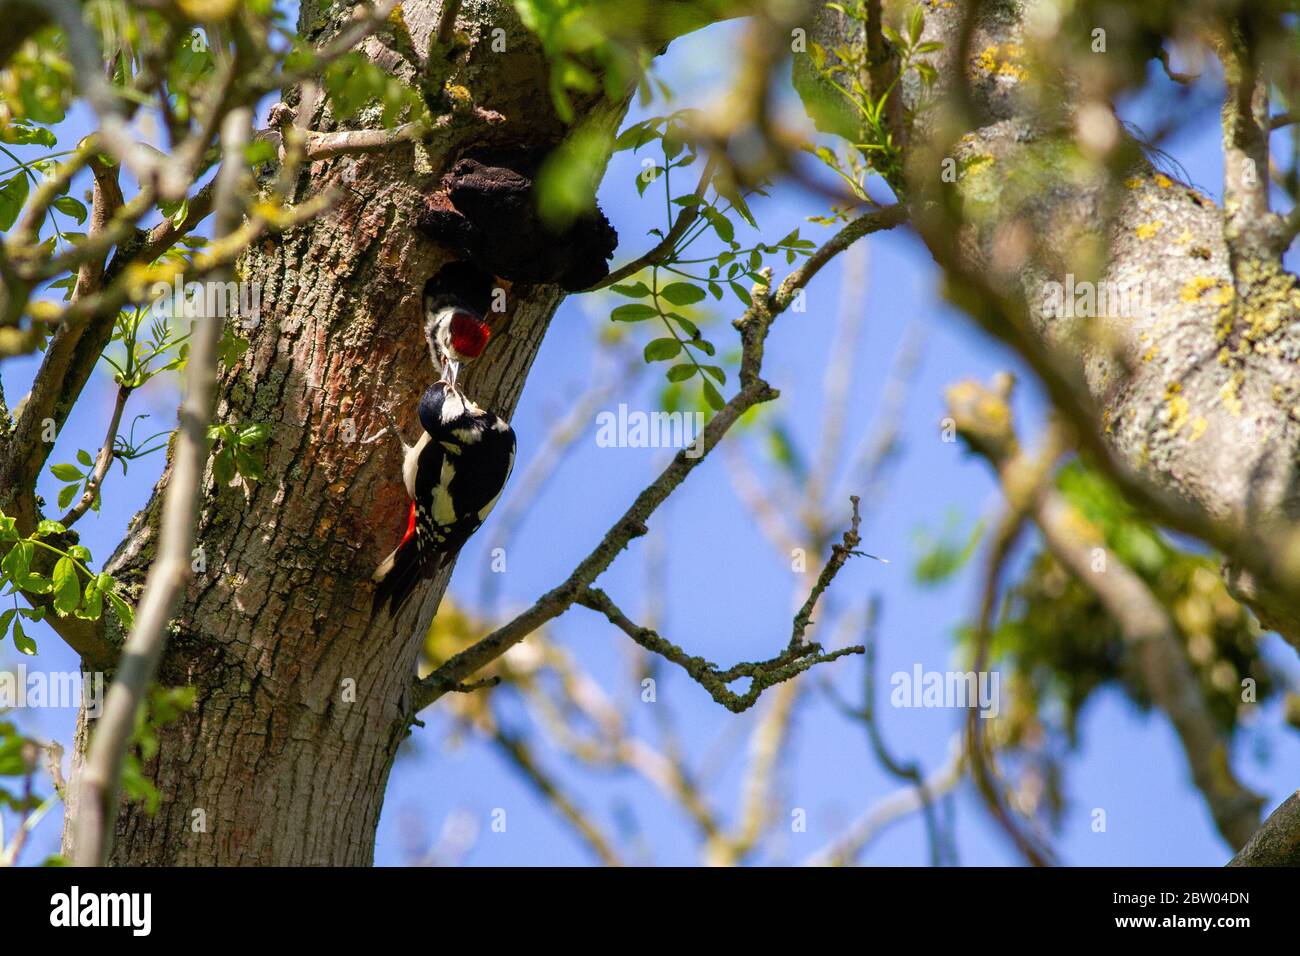 Adult greater spotted woodpecker feeding its chick in a nesting hole (carefully crafted under a fungus canopy), UK Stock Photo